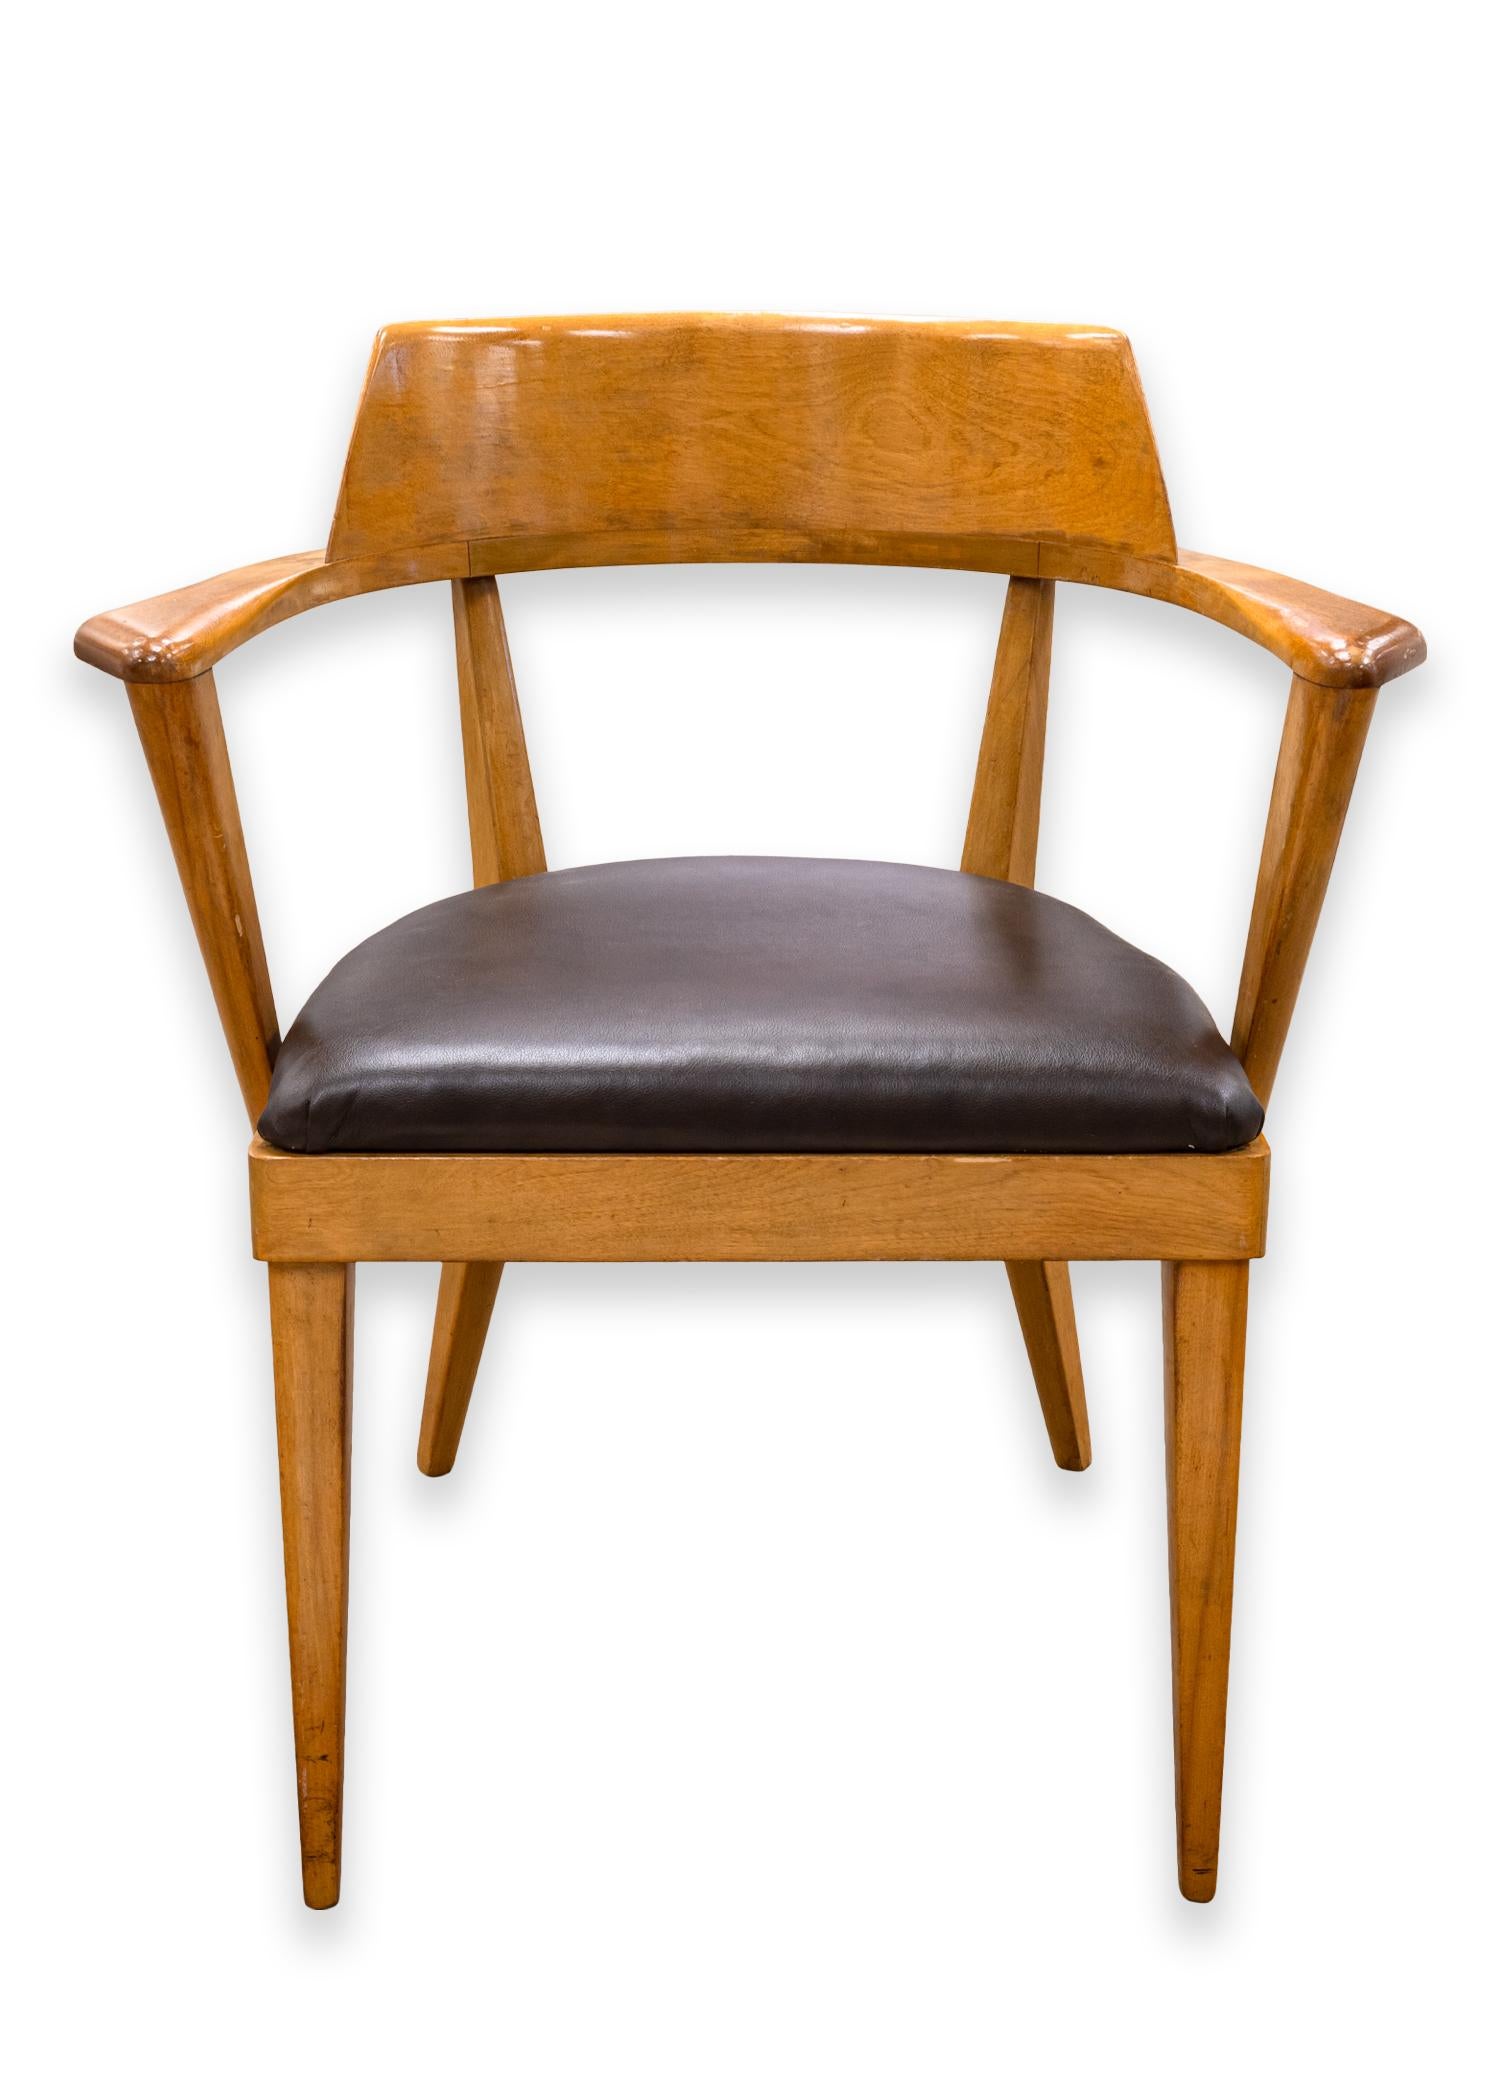 A pair of Heywood Wakefield arm chairs. A very handsome set of armchairs designed by Leo Jiranek and Ernest Herrmann for Heywood Wakefield. These chairs are constructed out of birch with a 